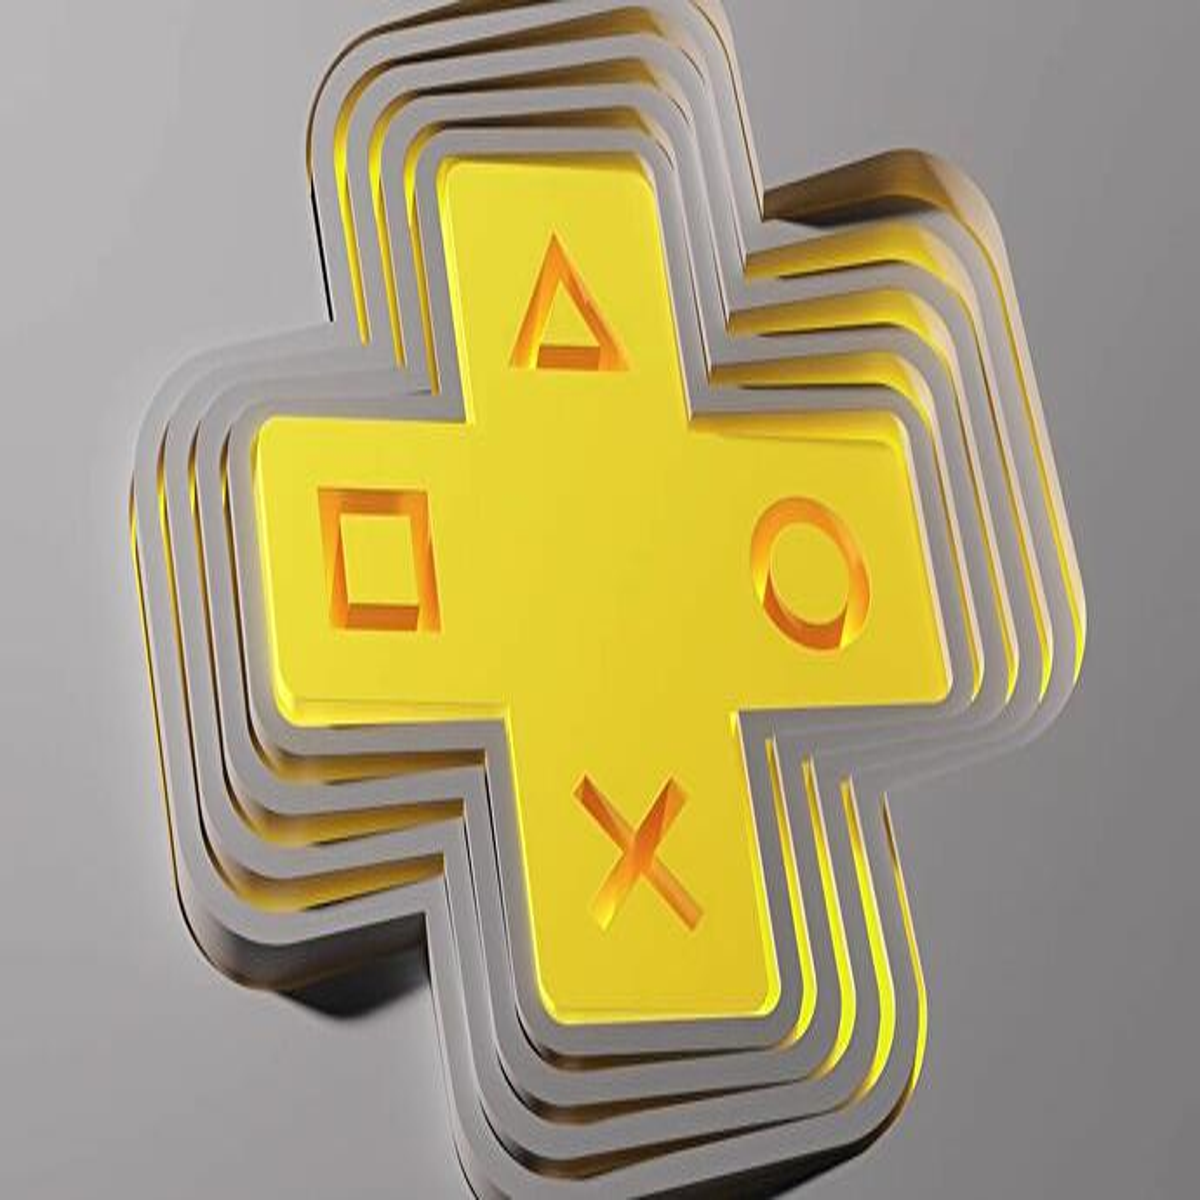 PlayStation Plus: Everything you need to know